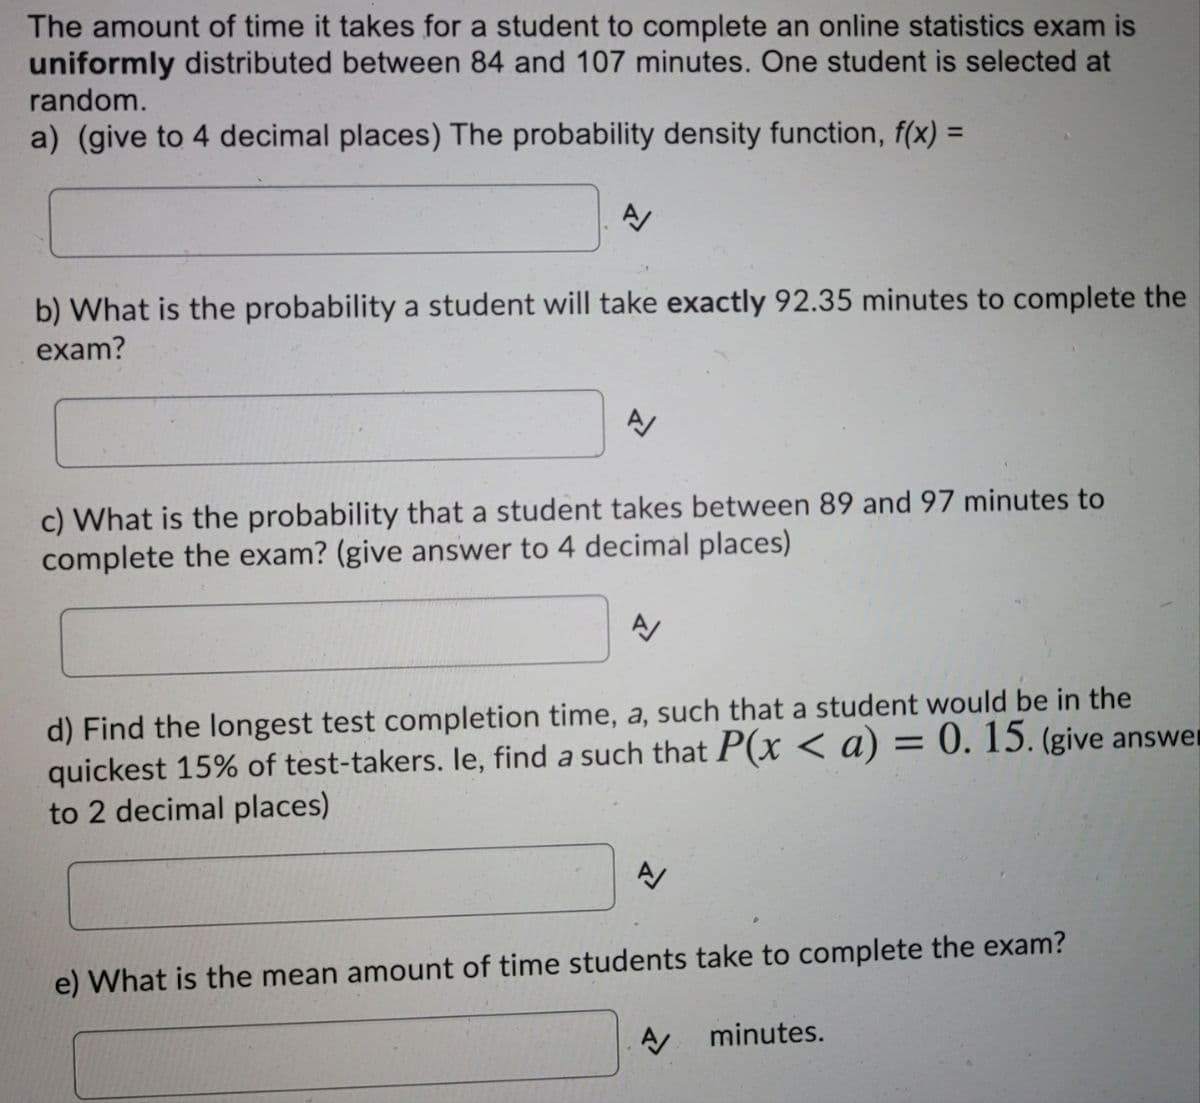 The amount of time it takes for a student to complete an online statistics exam is
uniformly distributed between 84 and 107 minutes. One student is selected at
random.
a) (give to 4 decimal places) The probability density function, f(x) =
%3D
b) What is the probability a student will take exactly 92.35 minutes to complete the
exam?
c) What is the probability that a student takes between 89 and 97 minutes to
complete the exam? (give answer to 4 decimal places)
d) Find the longest test completion time, a, such that a student would be in the
quickest 15% of test-takers. le, find a such that P(x < a) = 0. 15. (give answer
to 2 decimal places)
e) What is the mean amount of time students take to complete the exam?
minutes.
